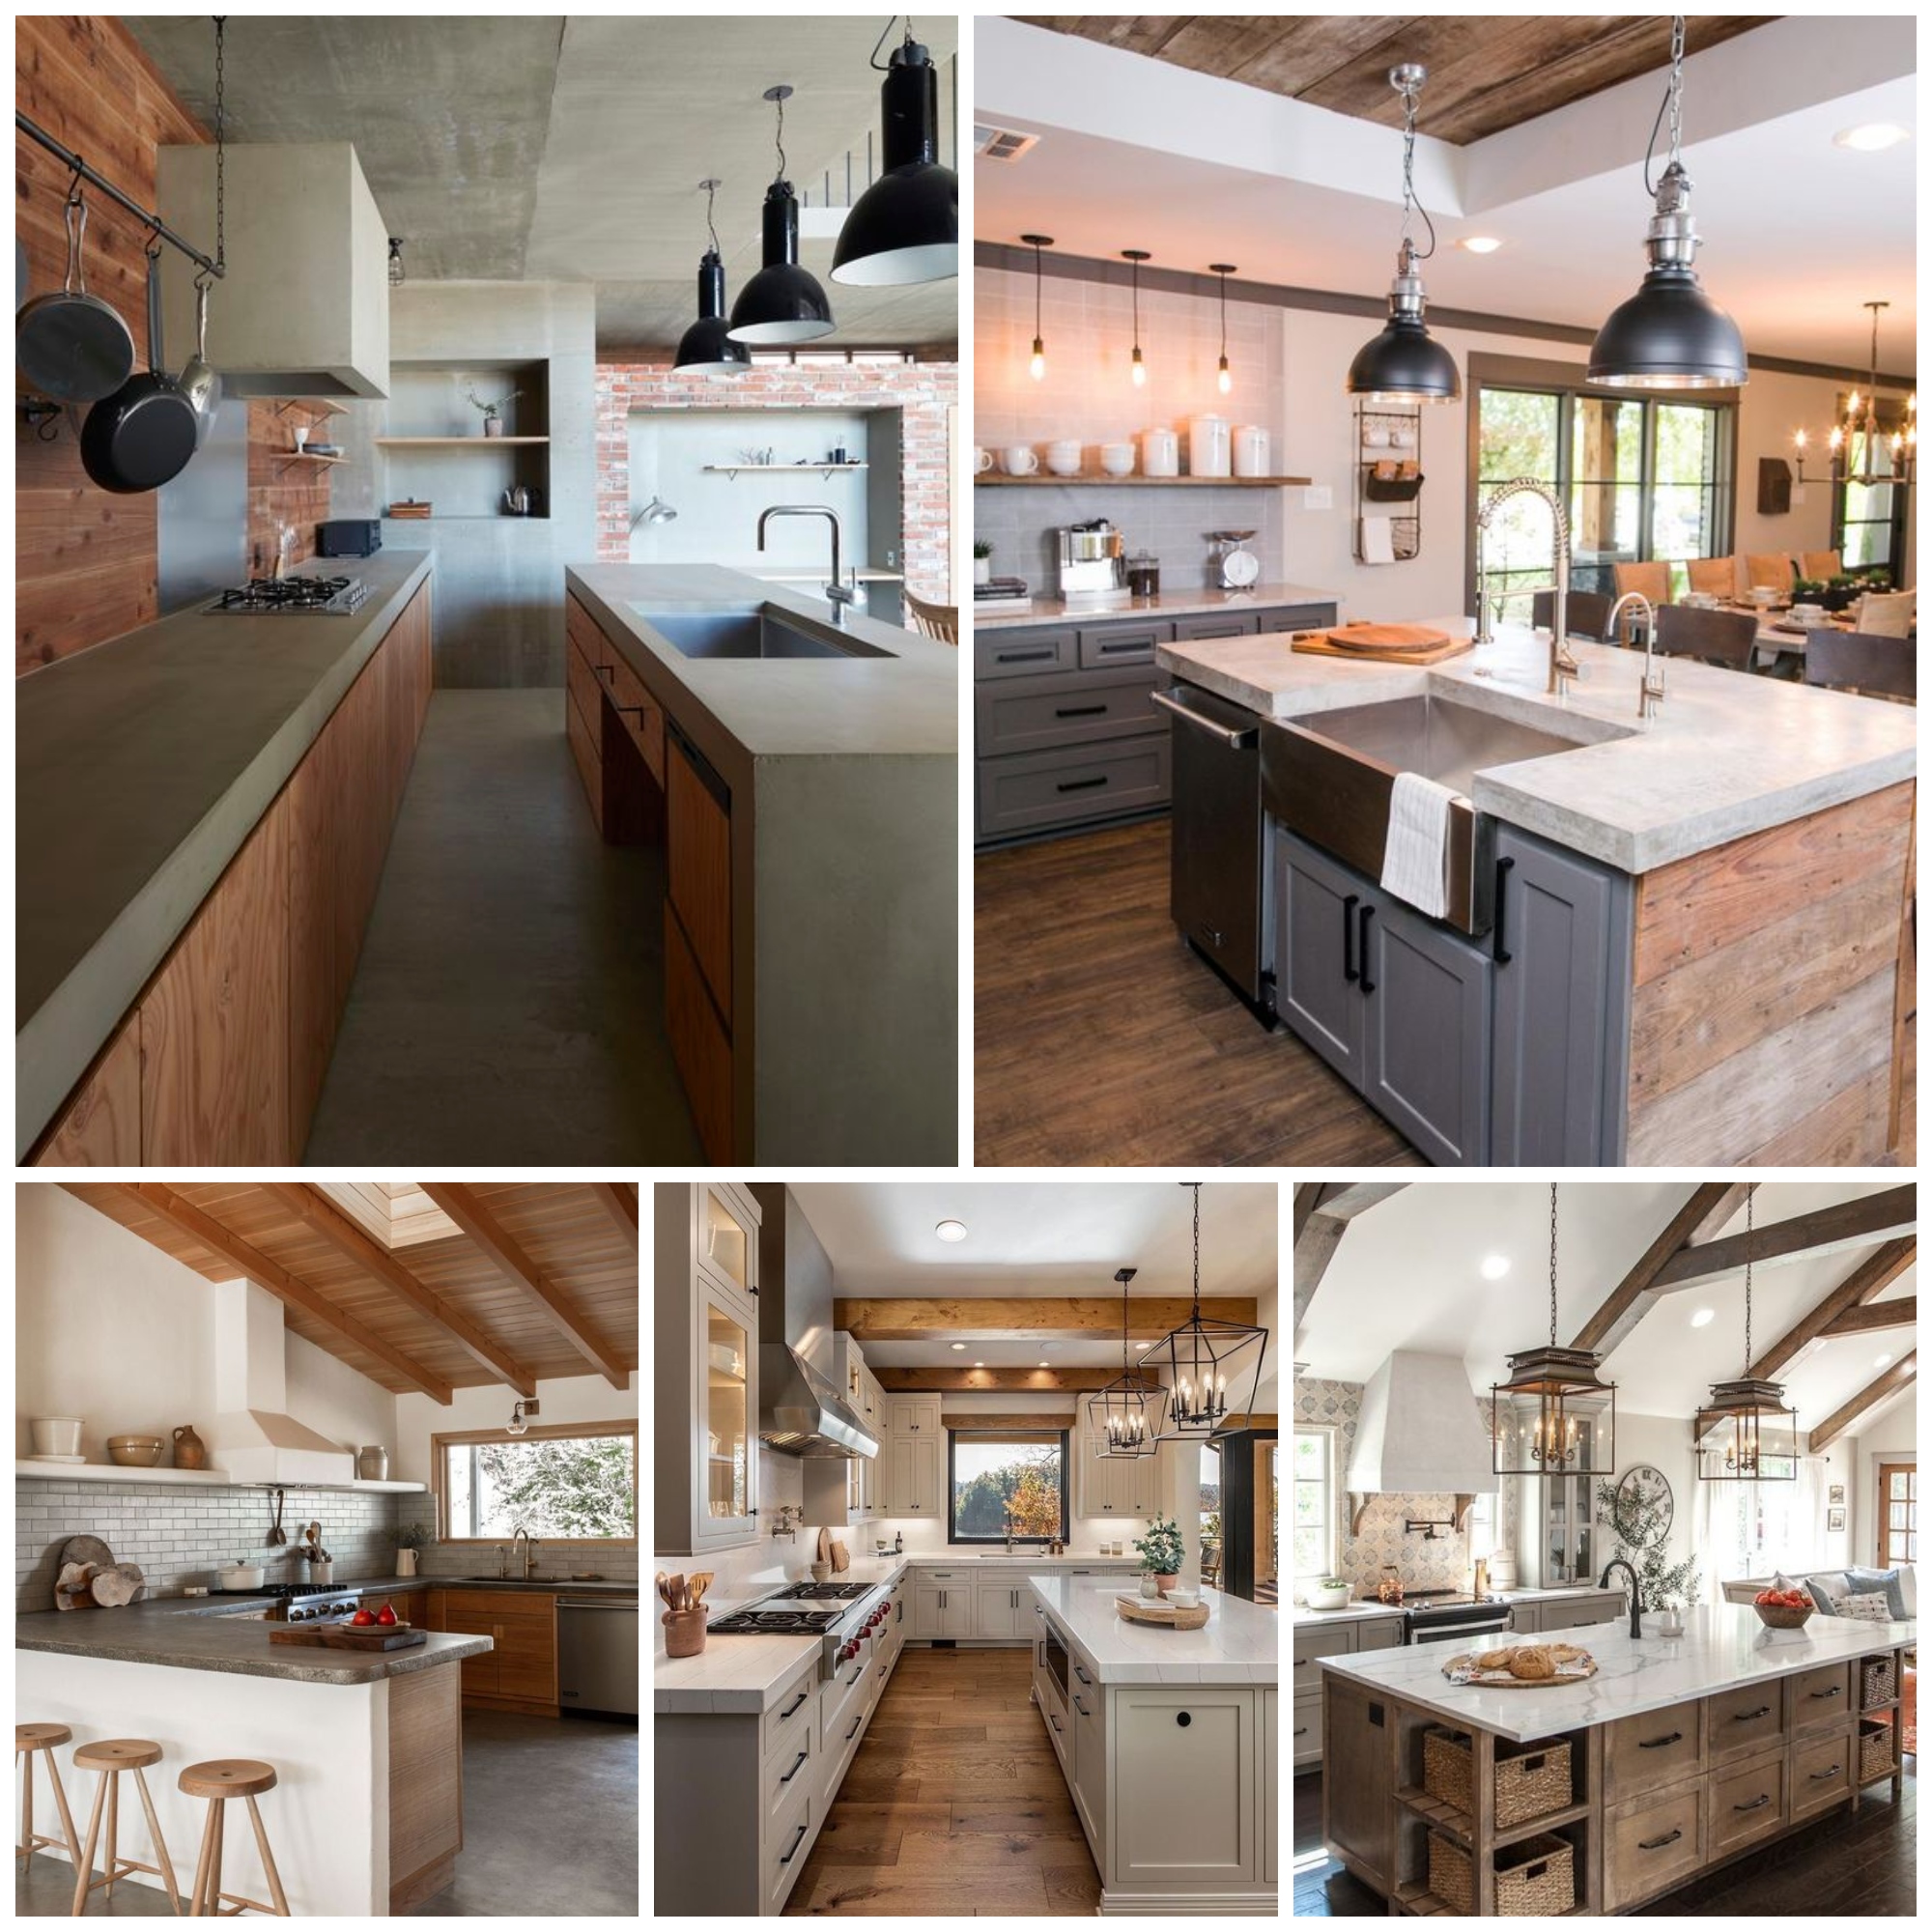 Striking Kitchens With Concrete Countertops